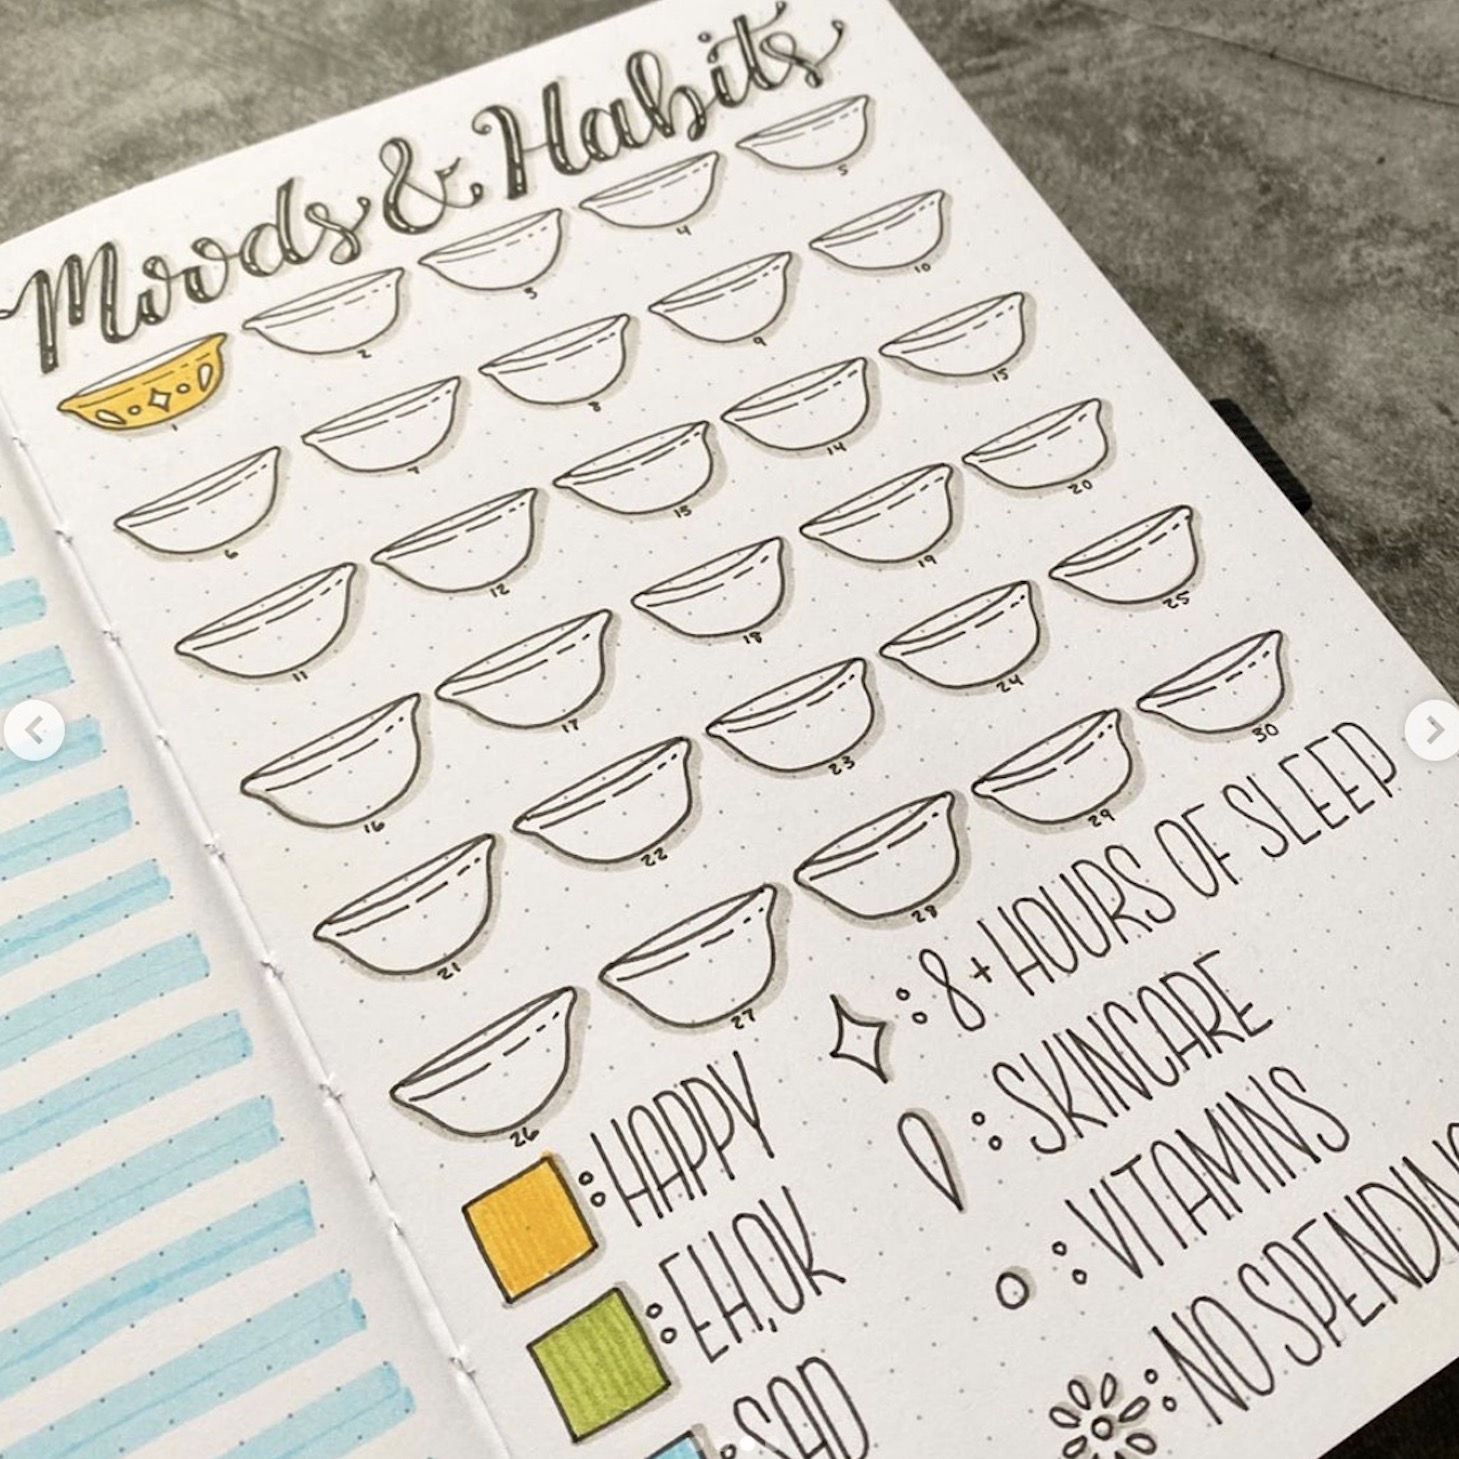 moods and habits bullet journal spread by plans that blossom